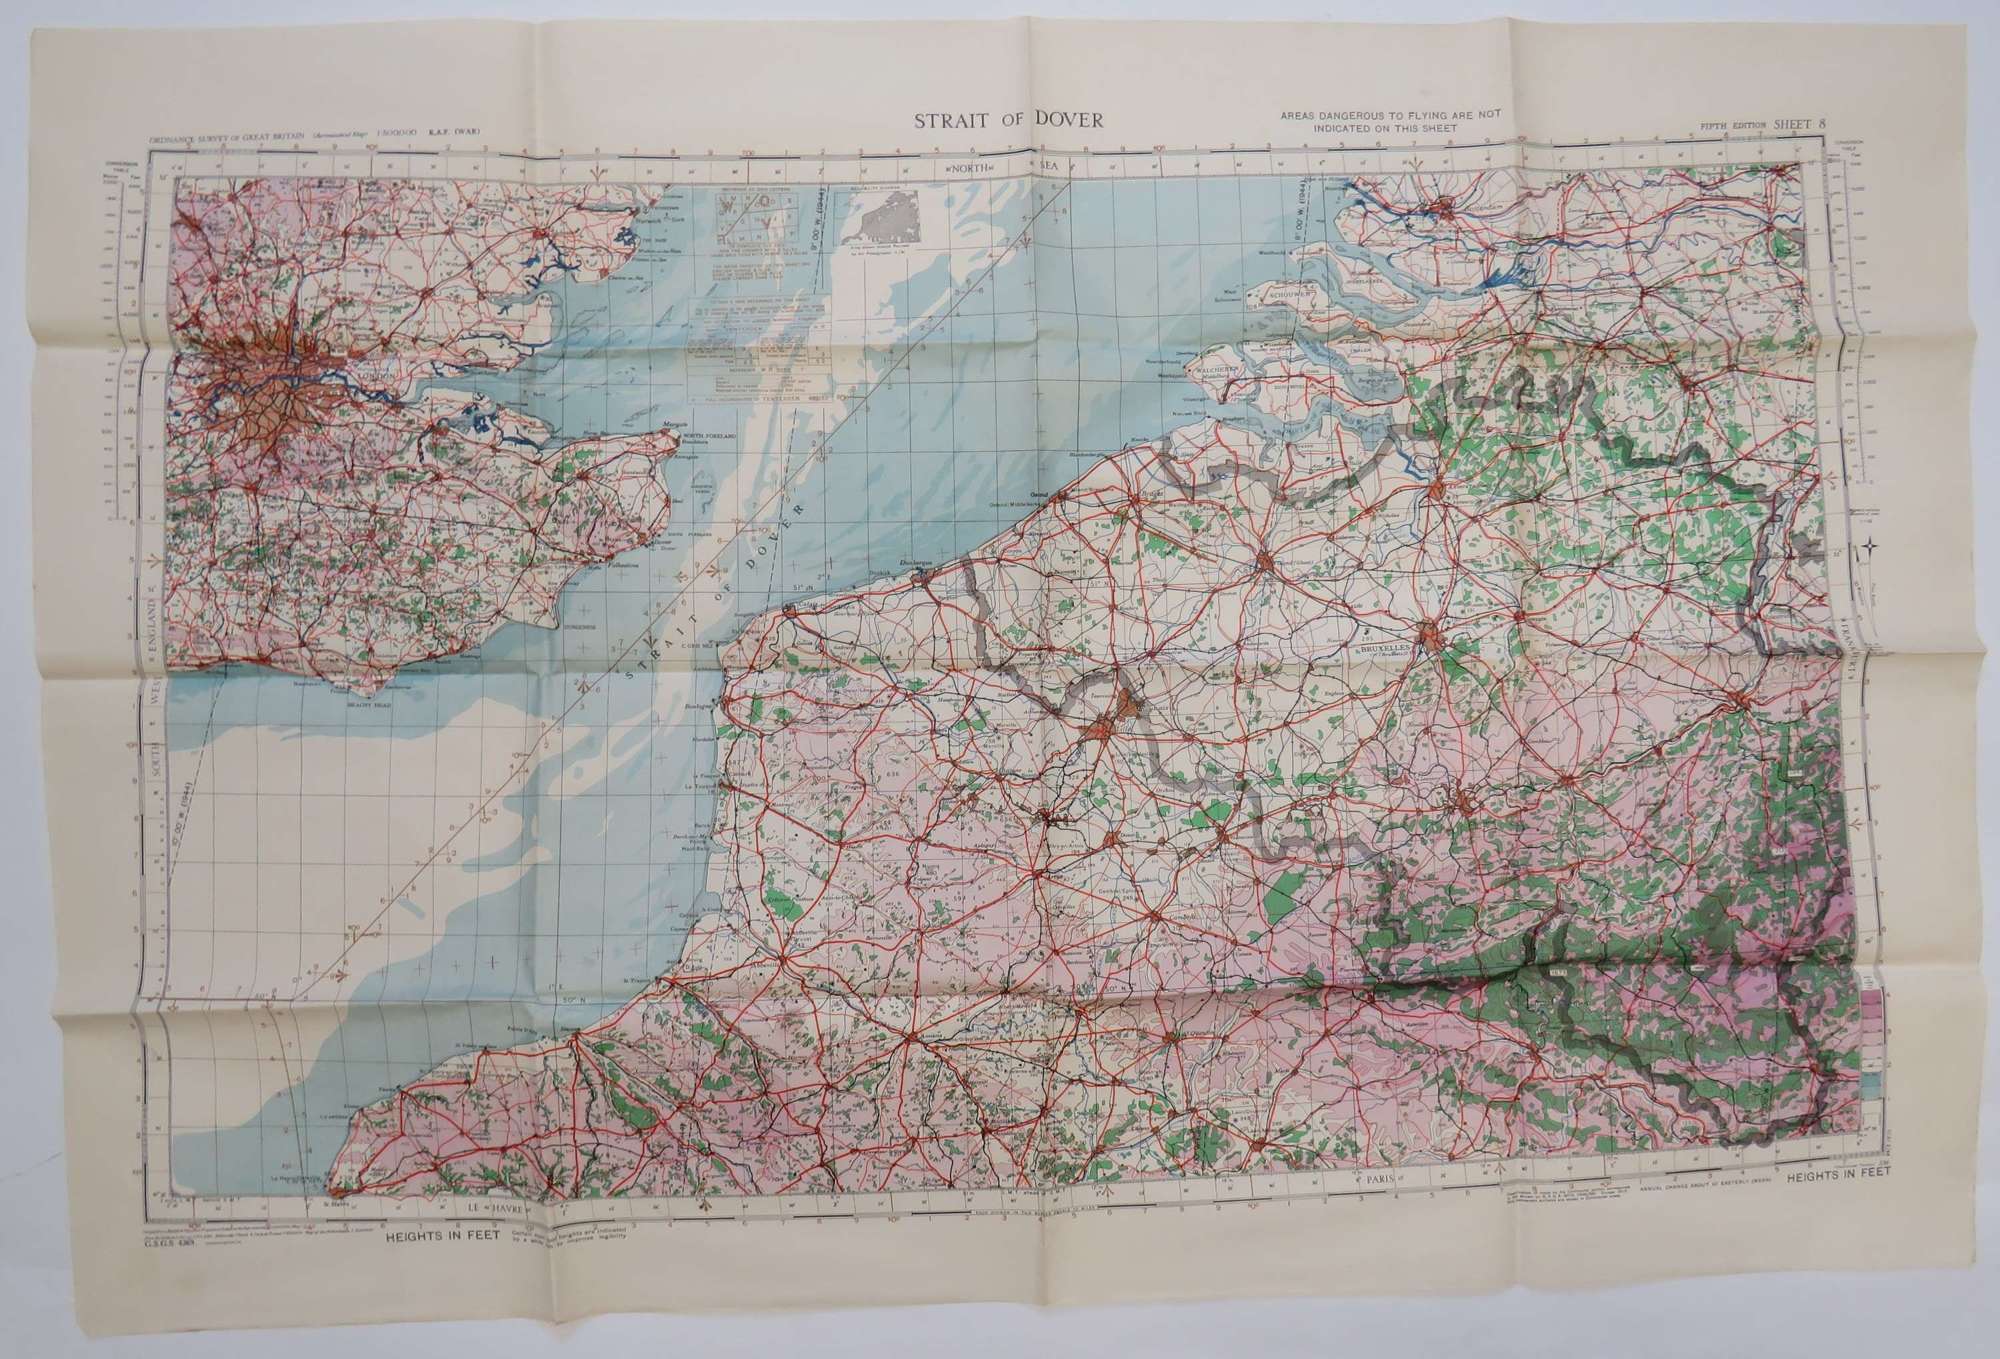 R.A.F Issue Straits of Dover Map